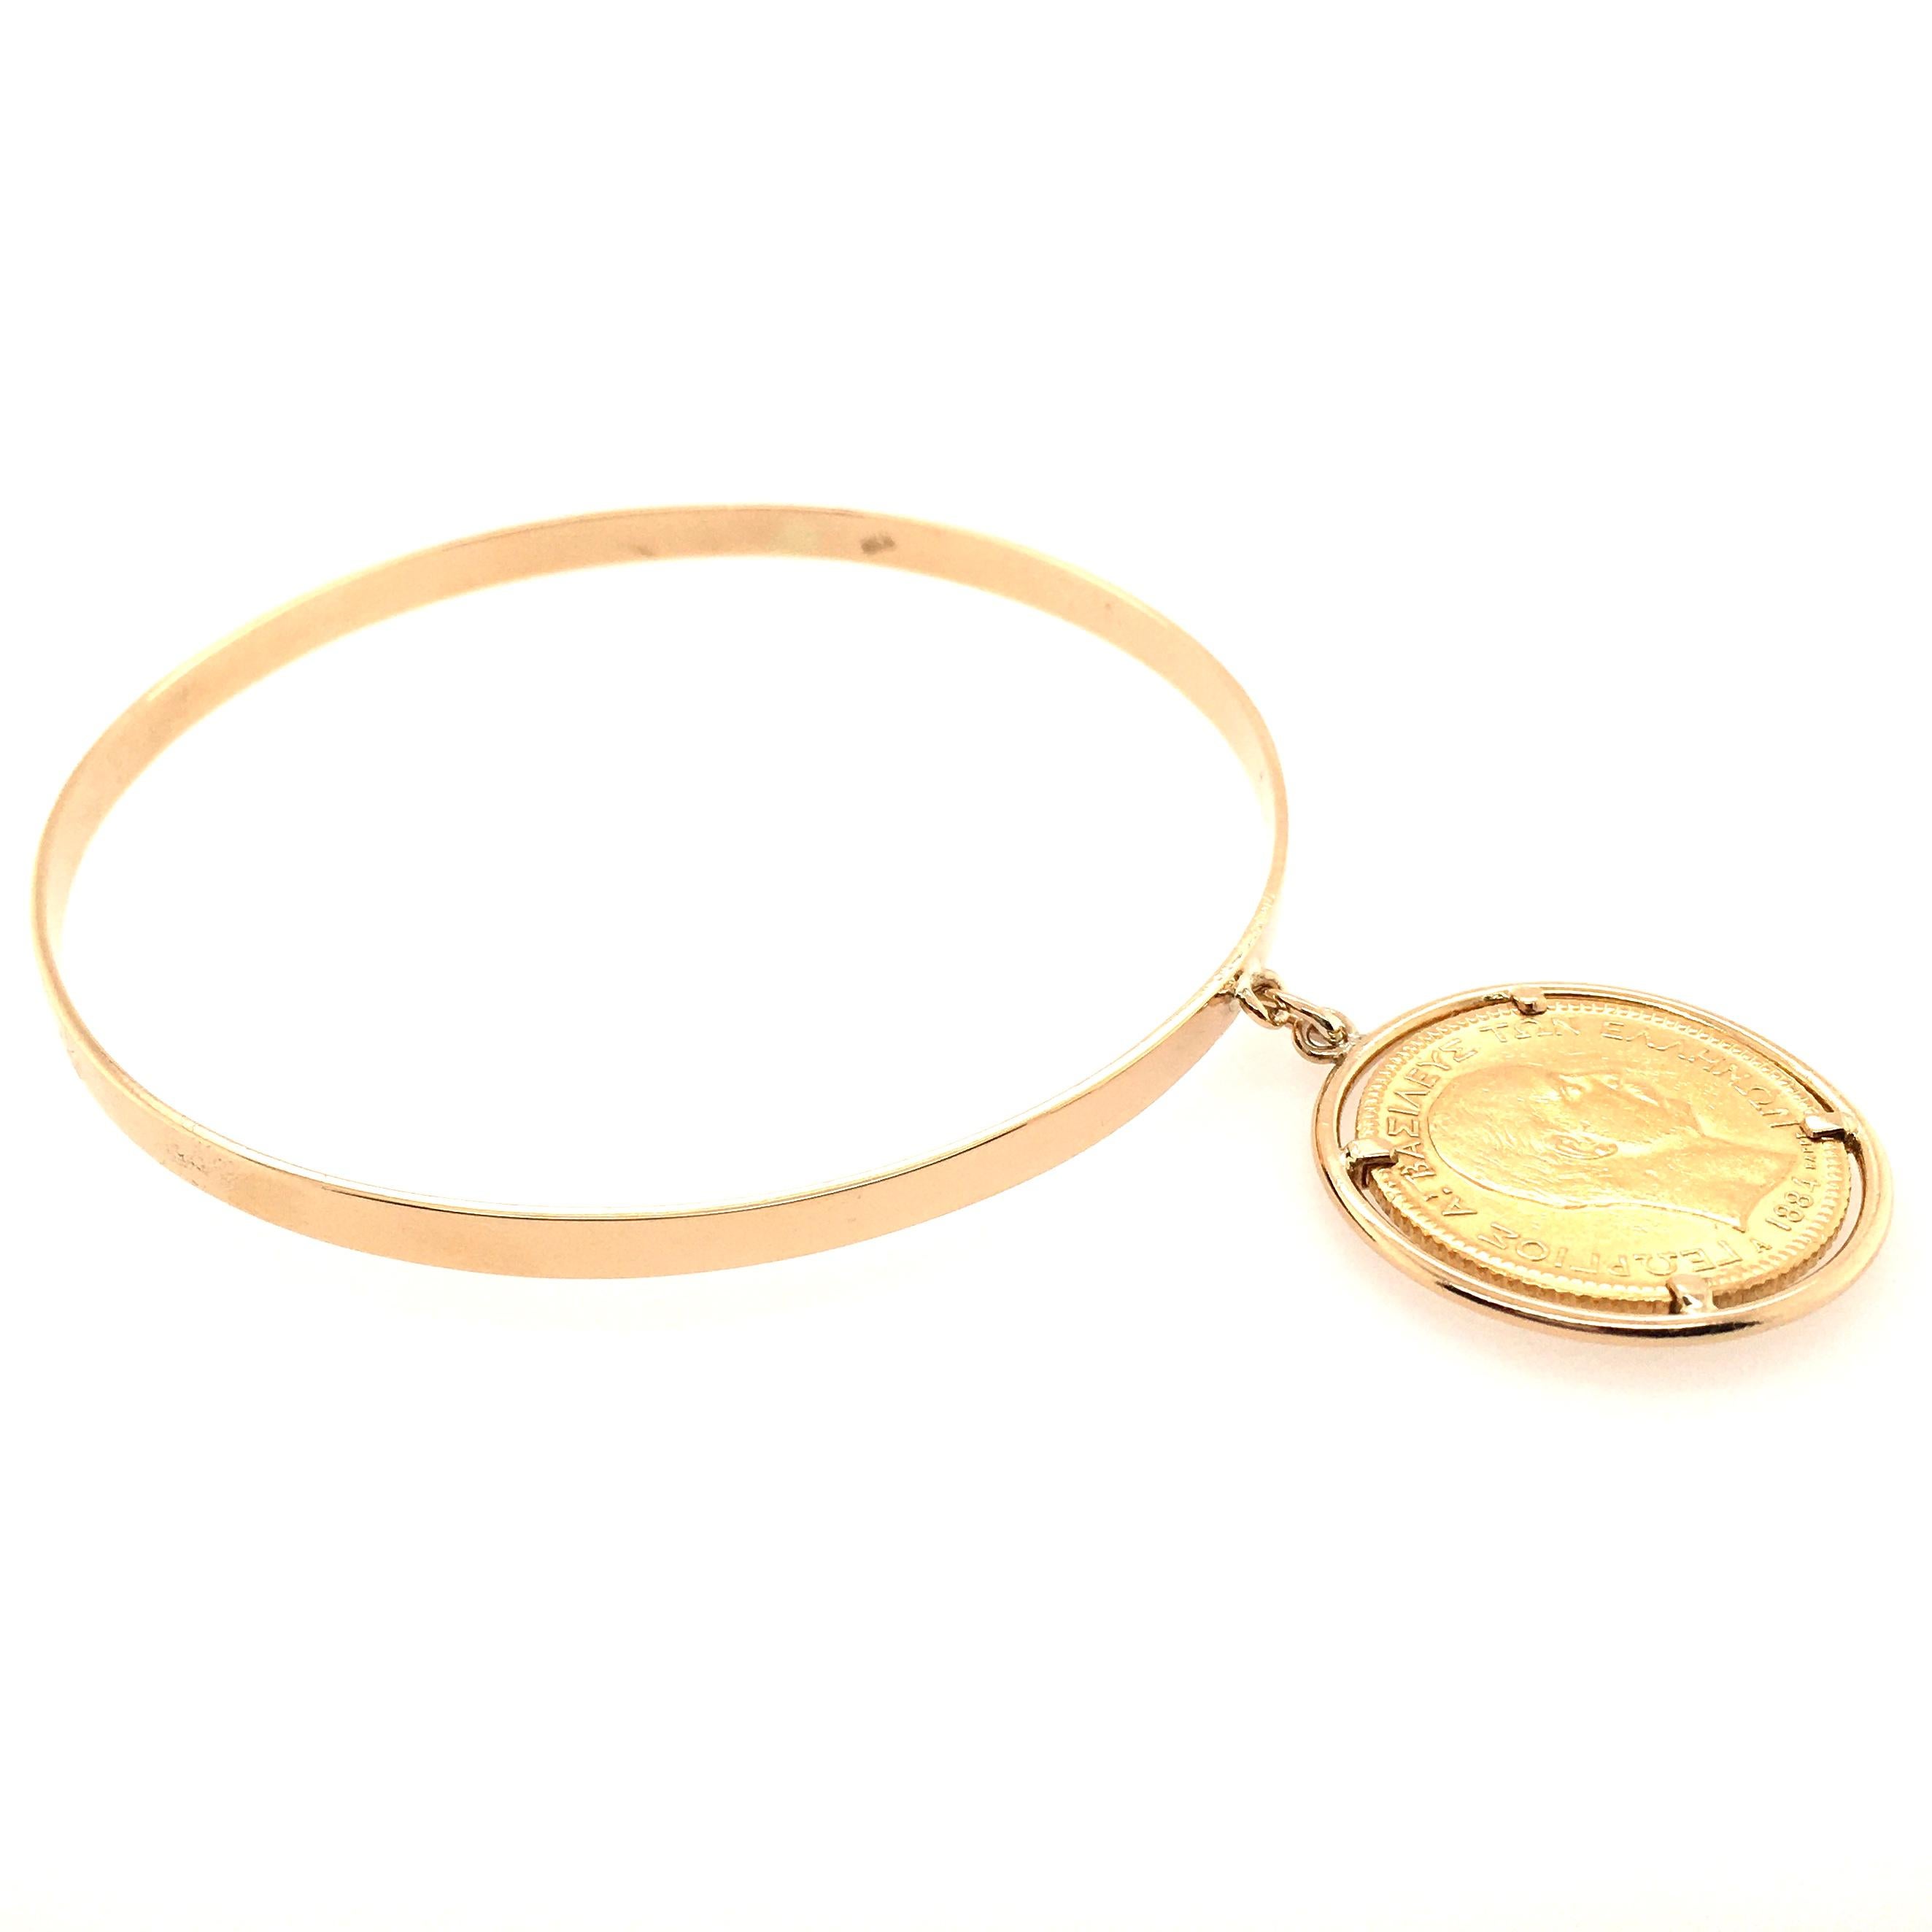 An 18 karat yellow gold bangle bracelet, with 22 karat yellow gold restrike 1884 50 Franc coin, within an 18 karat yellow gold frame. Diameter of coin is approximately 1 inch, gross weight is approximately 18.2 grams. 